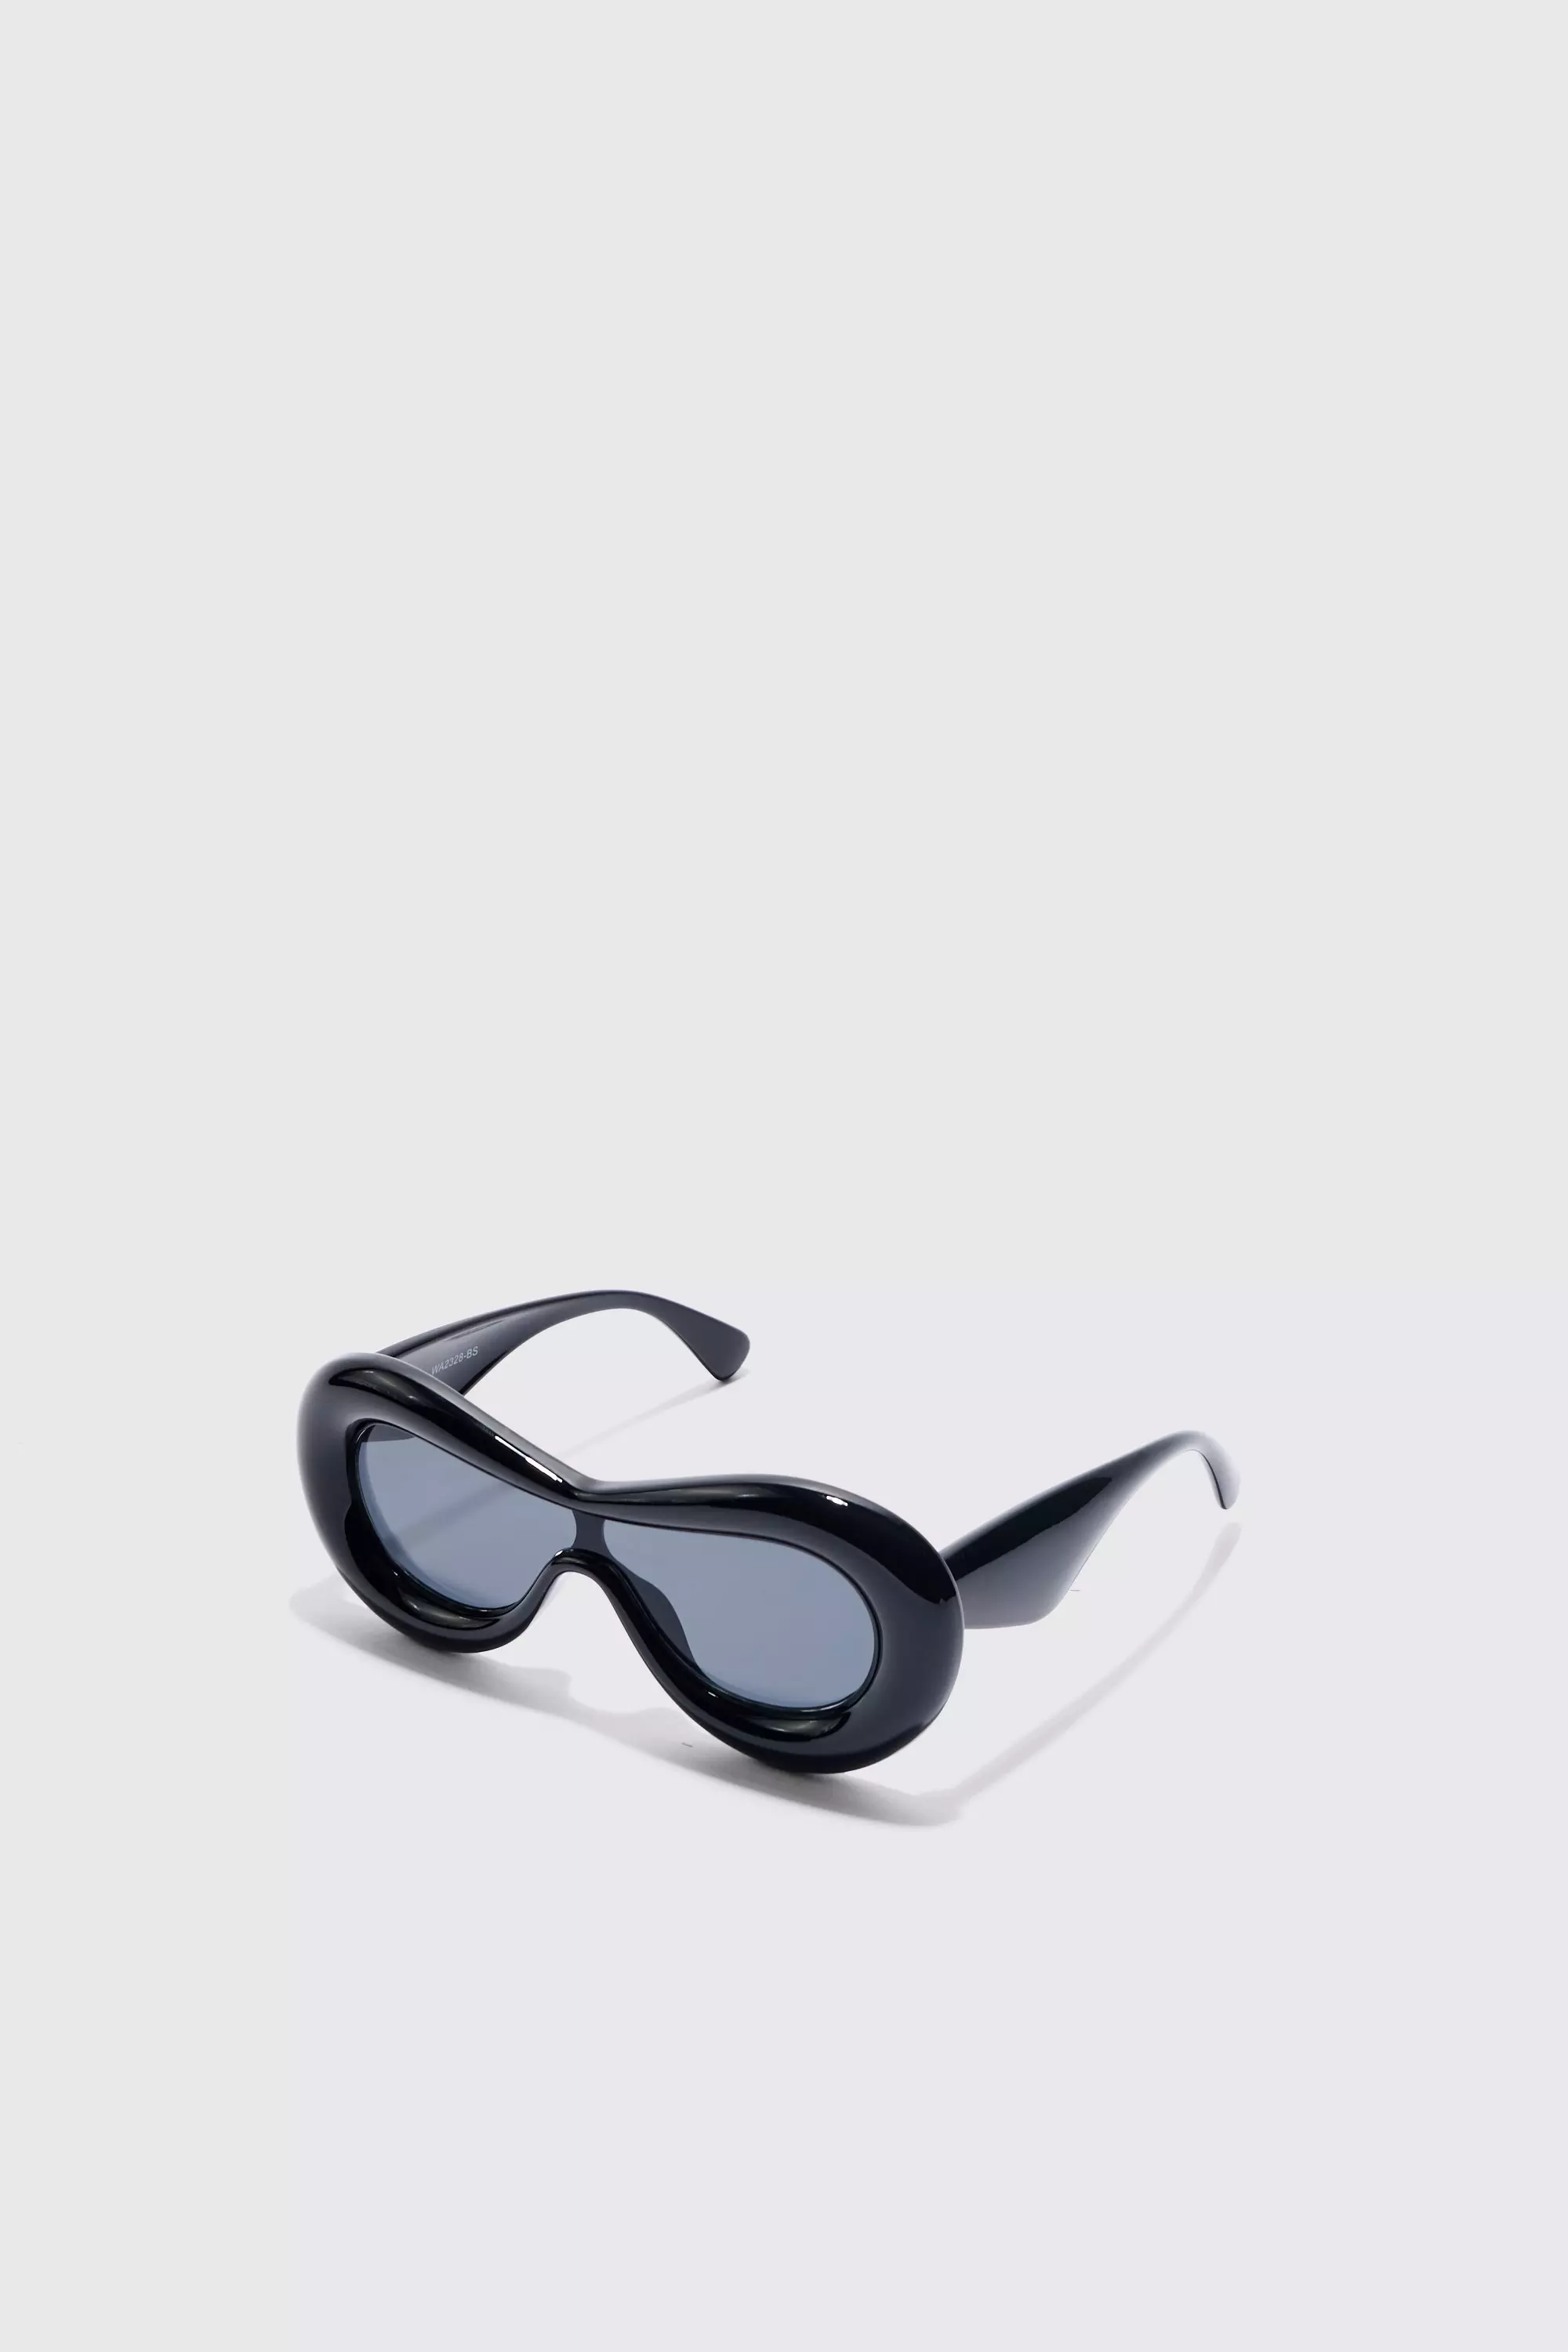 Inflated Sunglasses Black